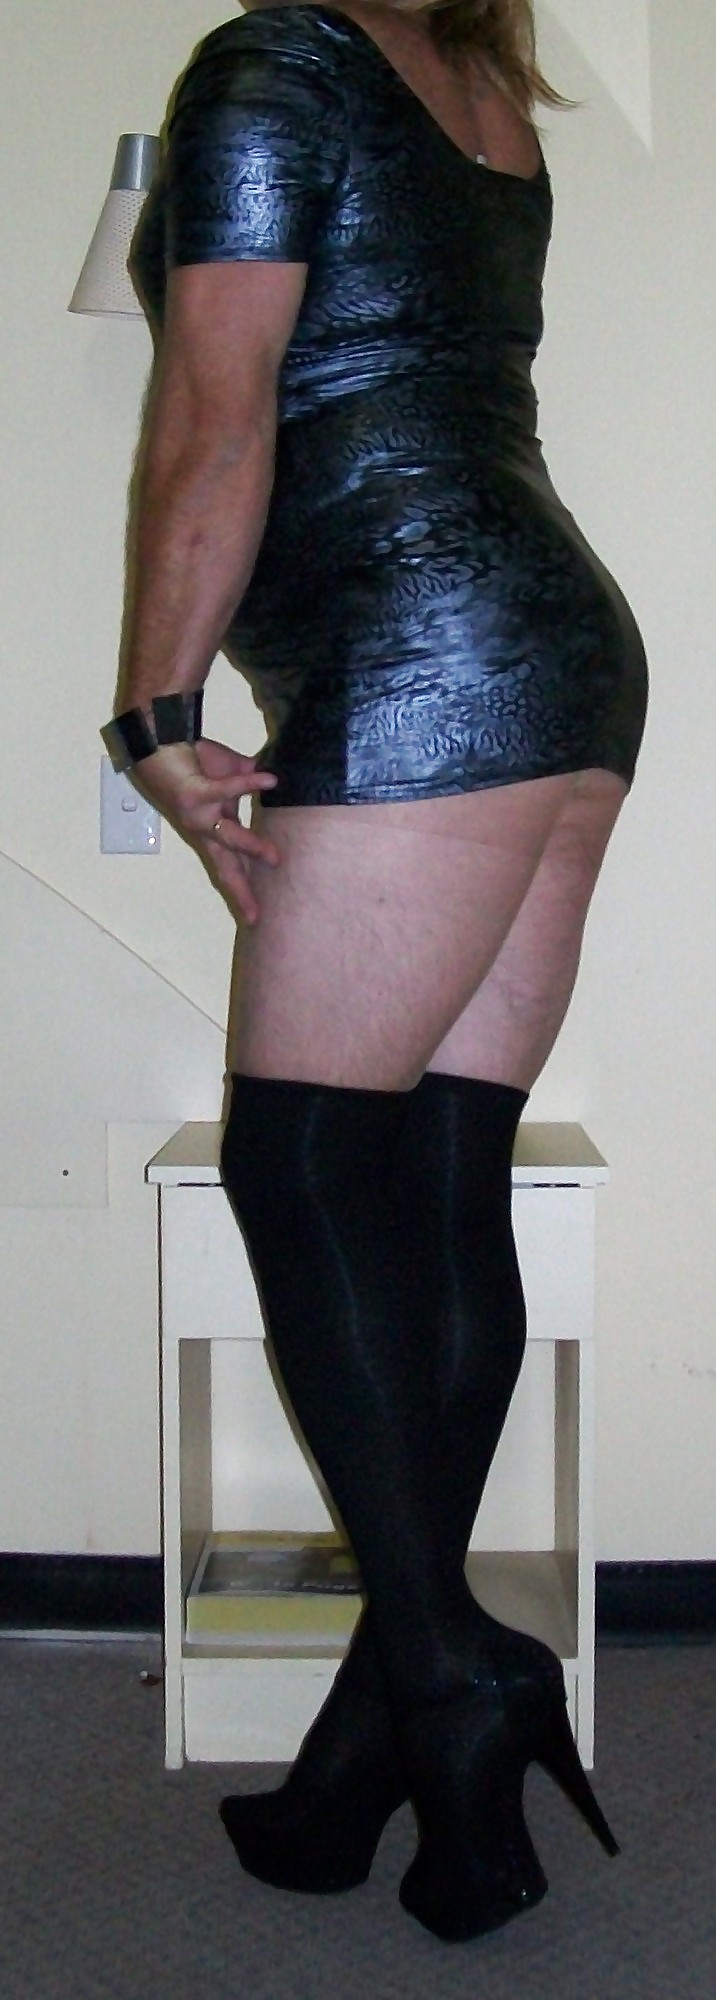 Xdresser roxy before going out to a sex party #12048318